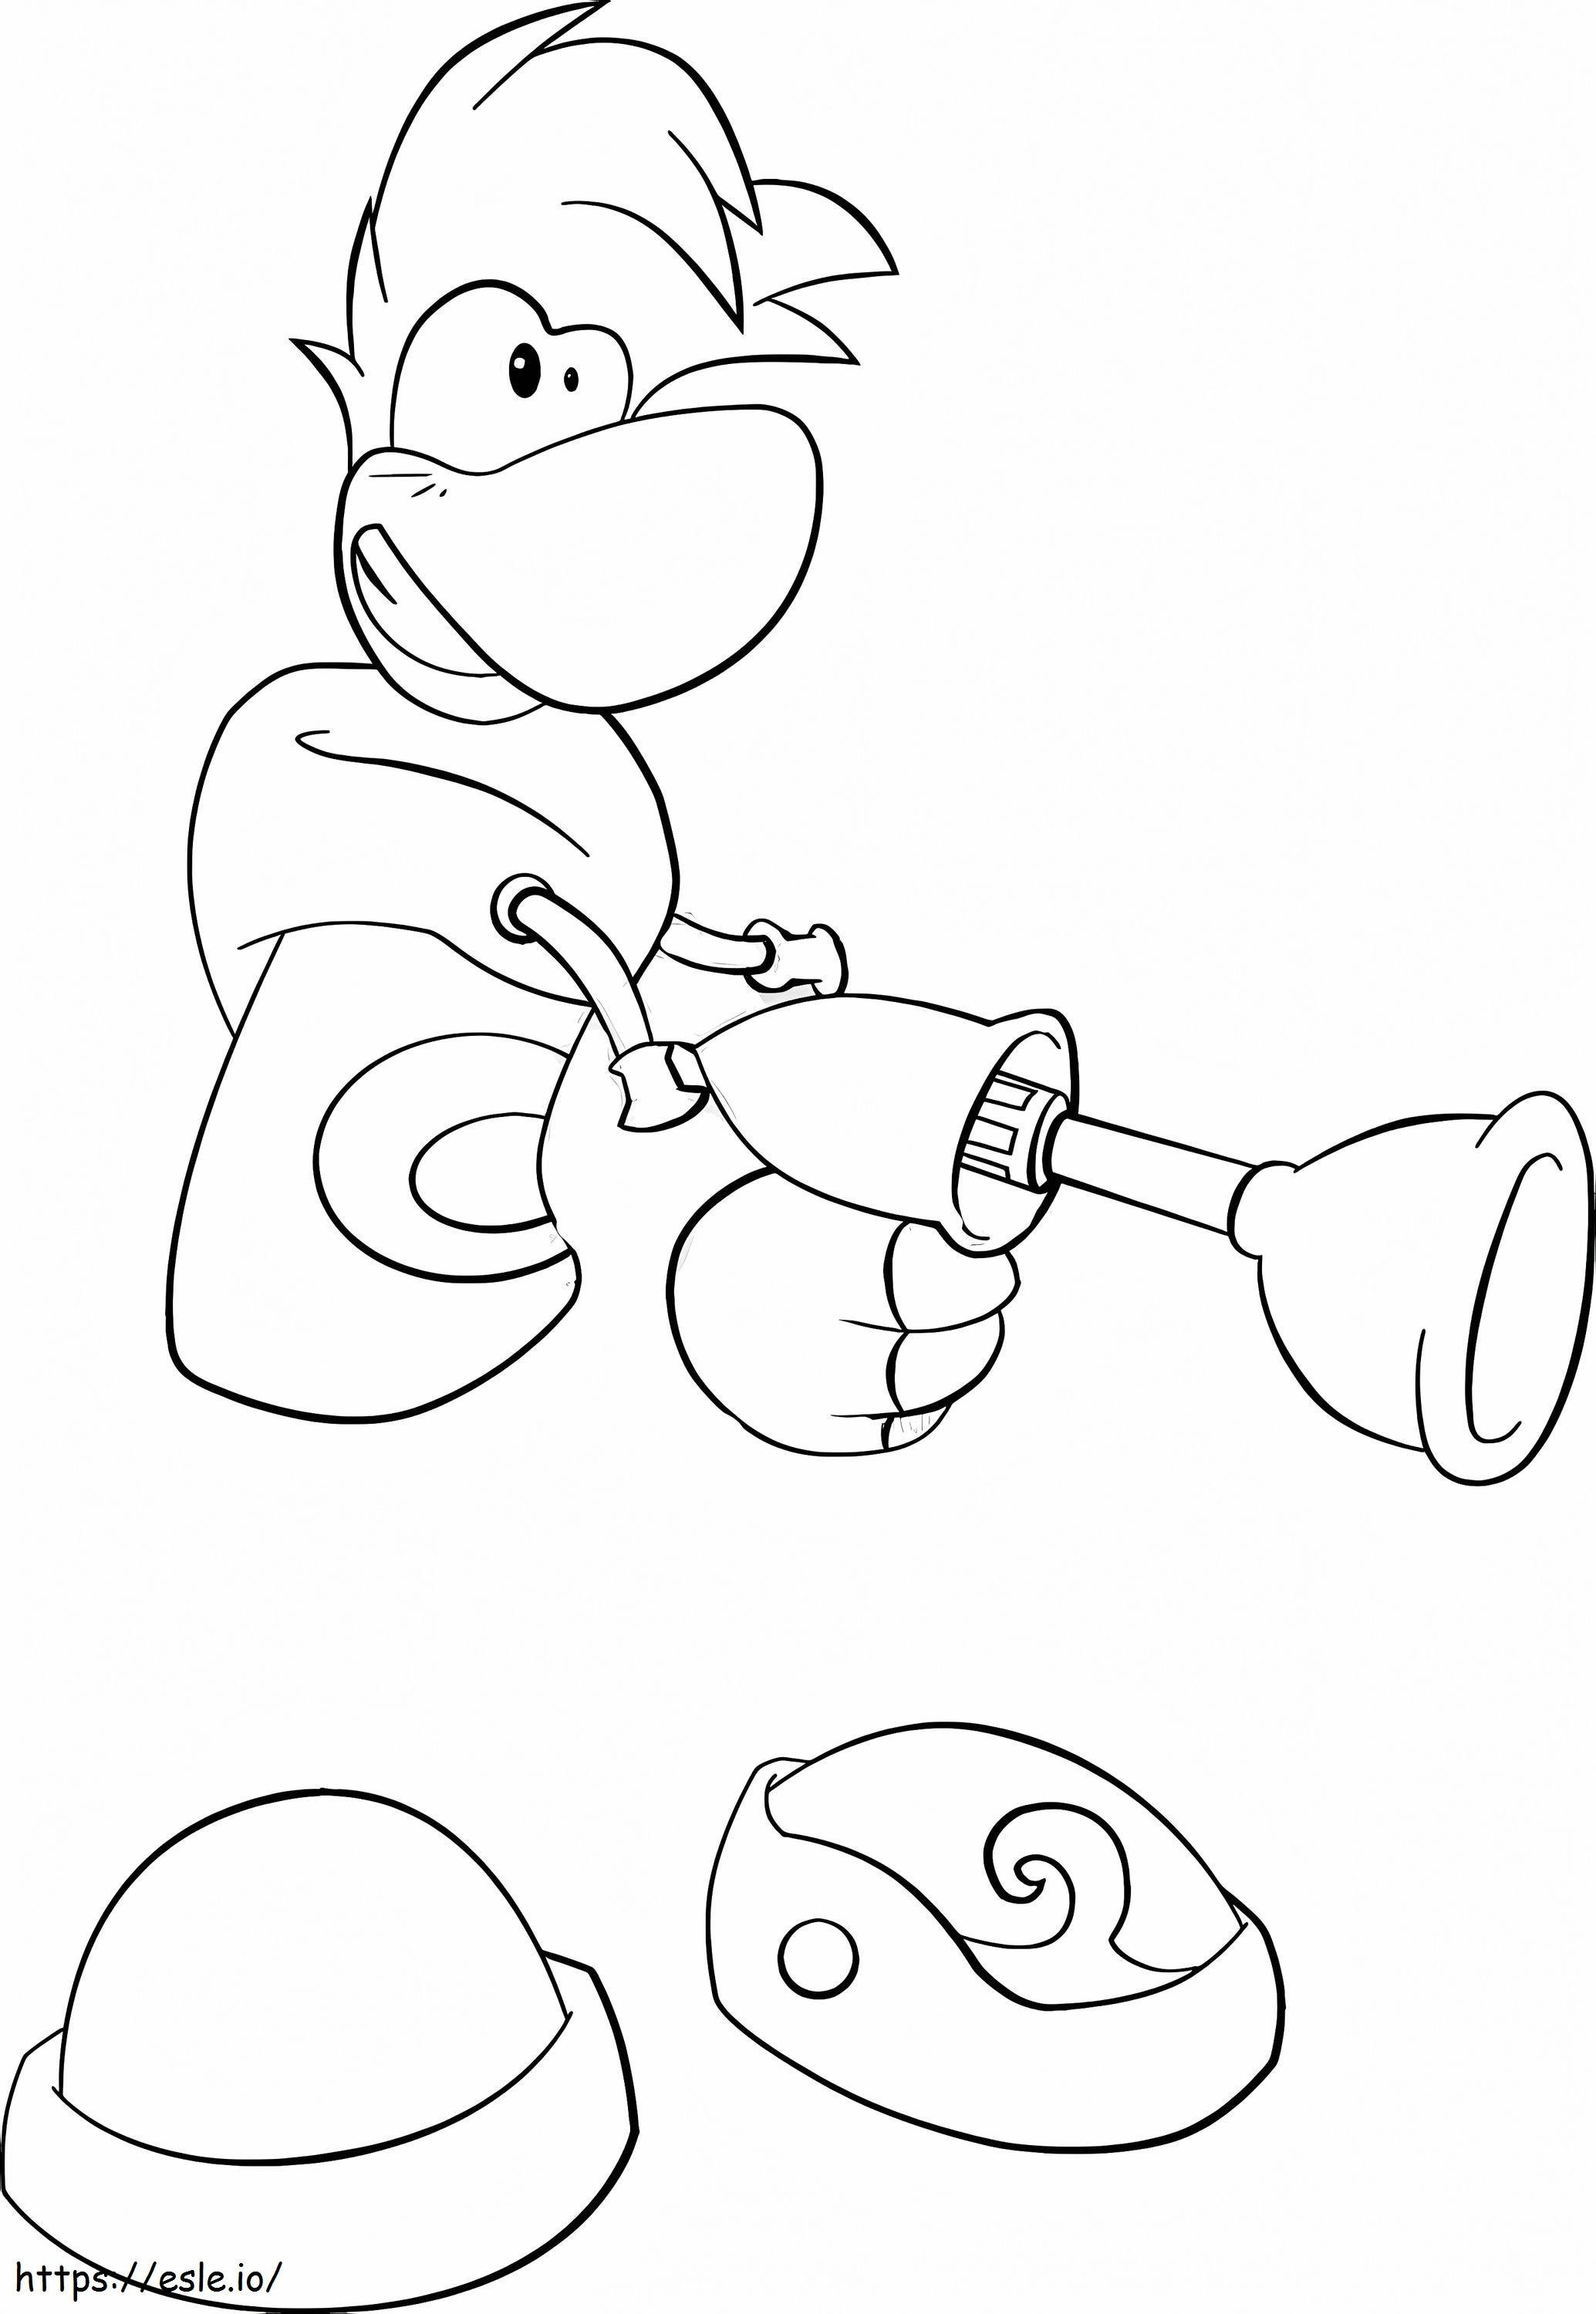 Awesome Rayman coloring page